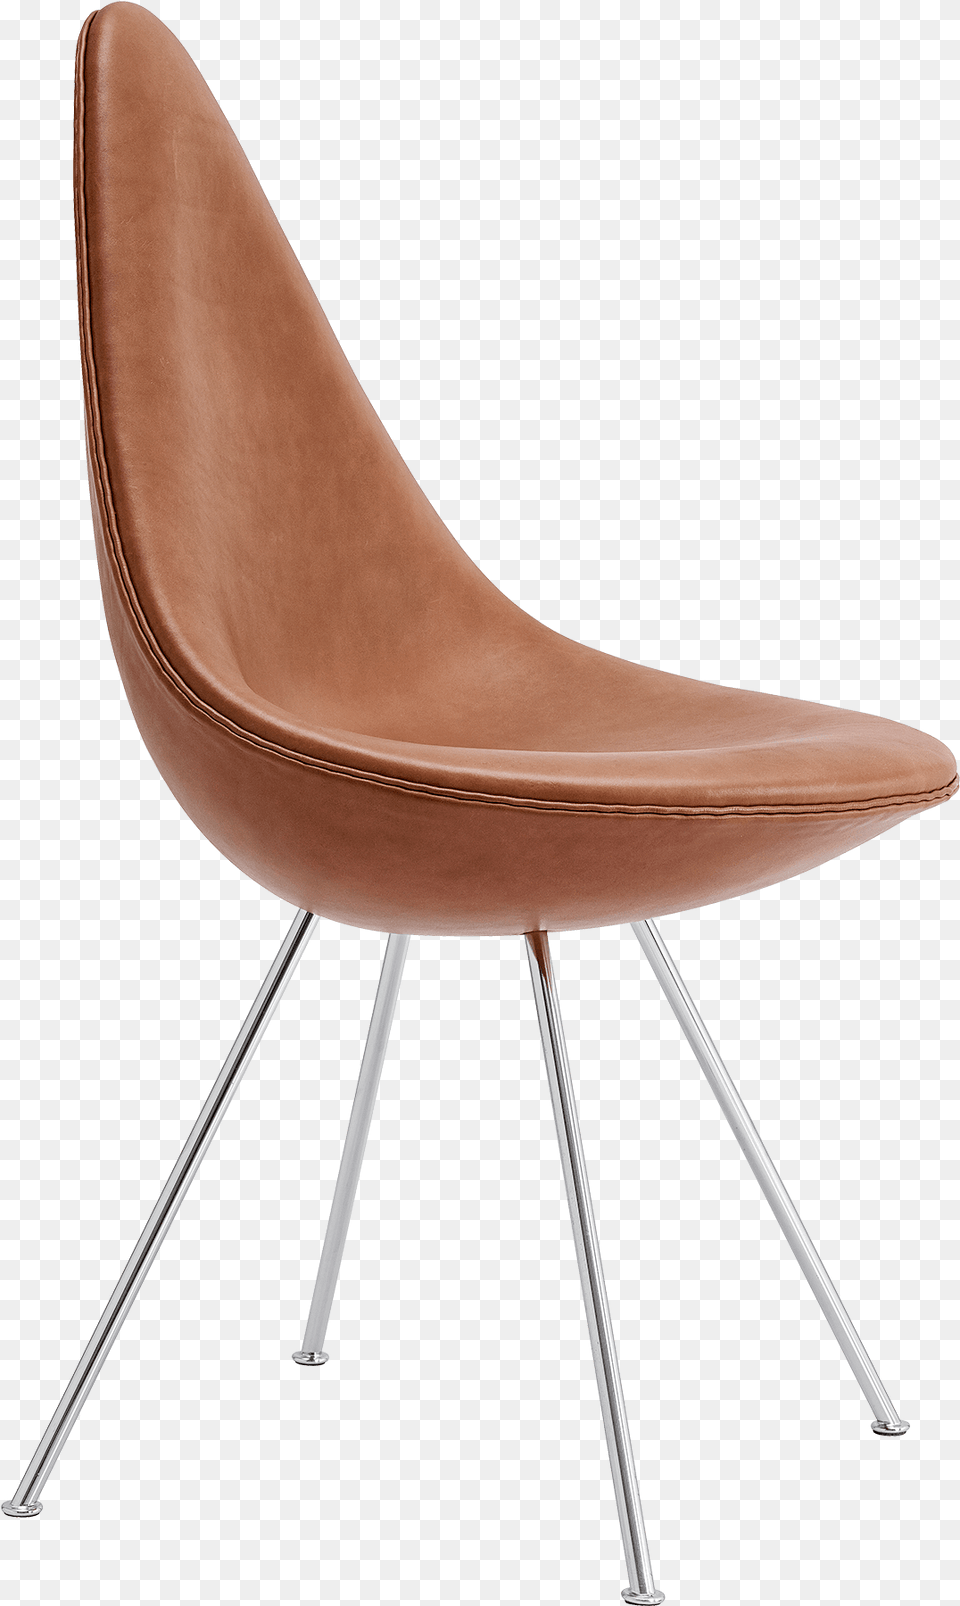 The Drop Chair Arne Jacobsen Upholstered Elegance Leather Drop Chair Arne Jacobsen, Furniture, Plywood, Wood, Cushion Free Transparent Png